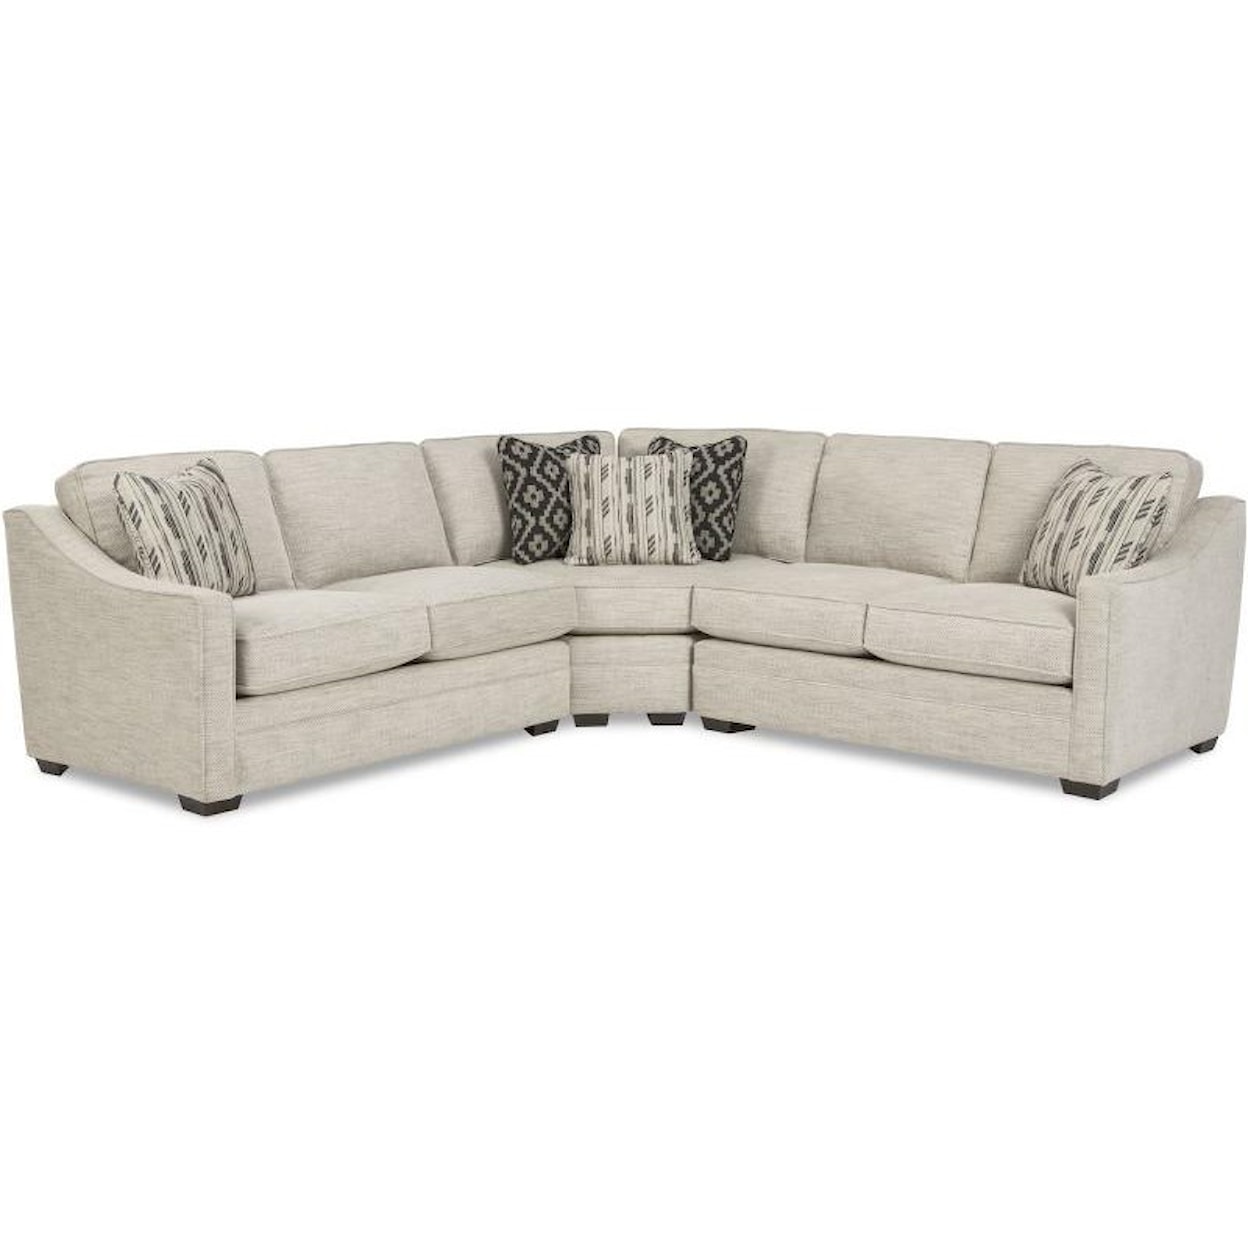 Hickorycraft F9 Series CraftMaster 3 PC Sectional